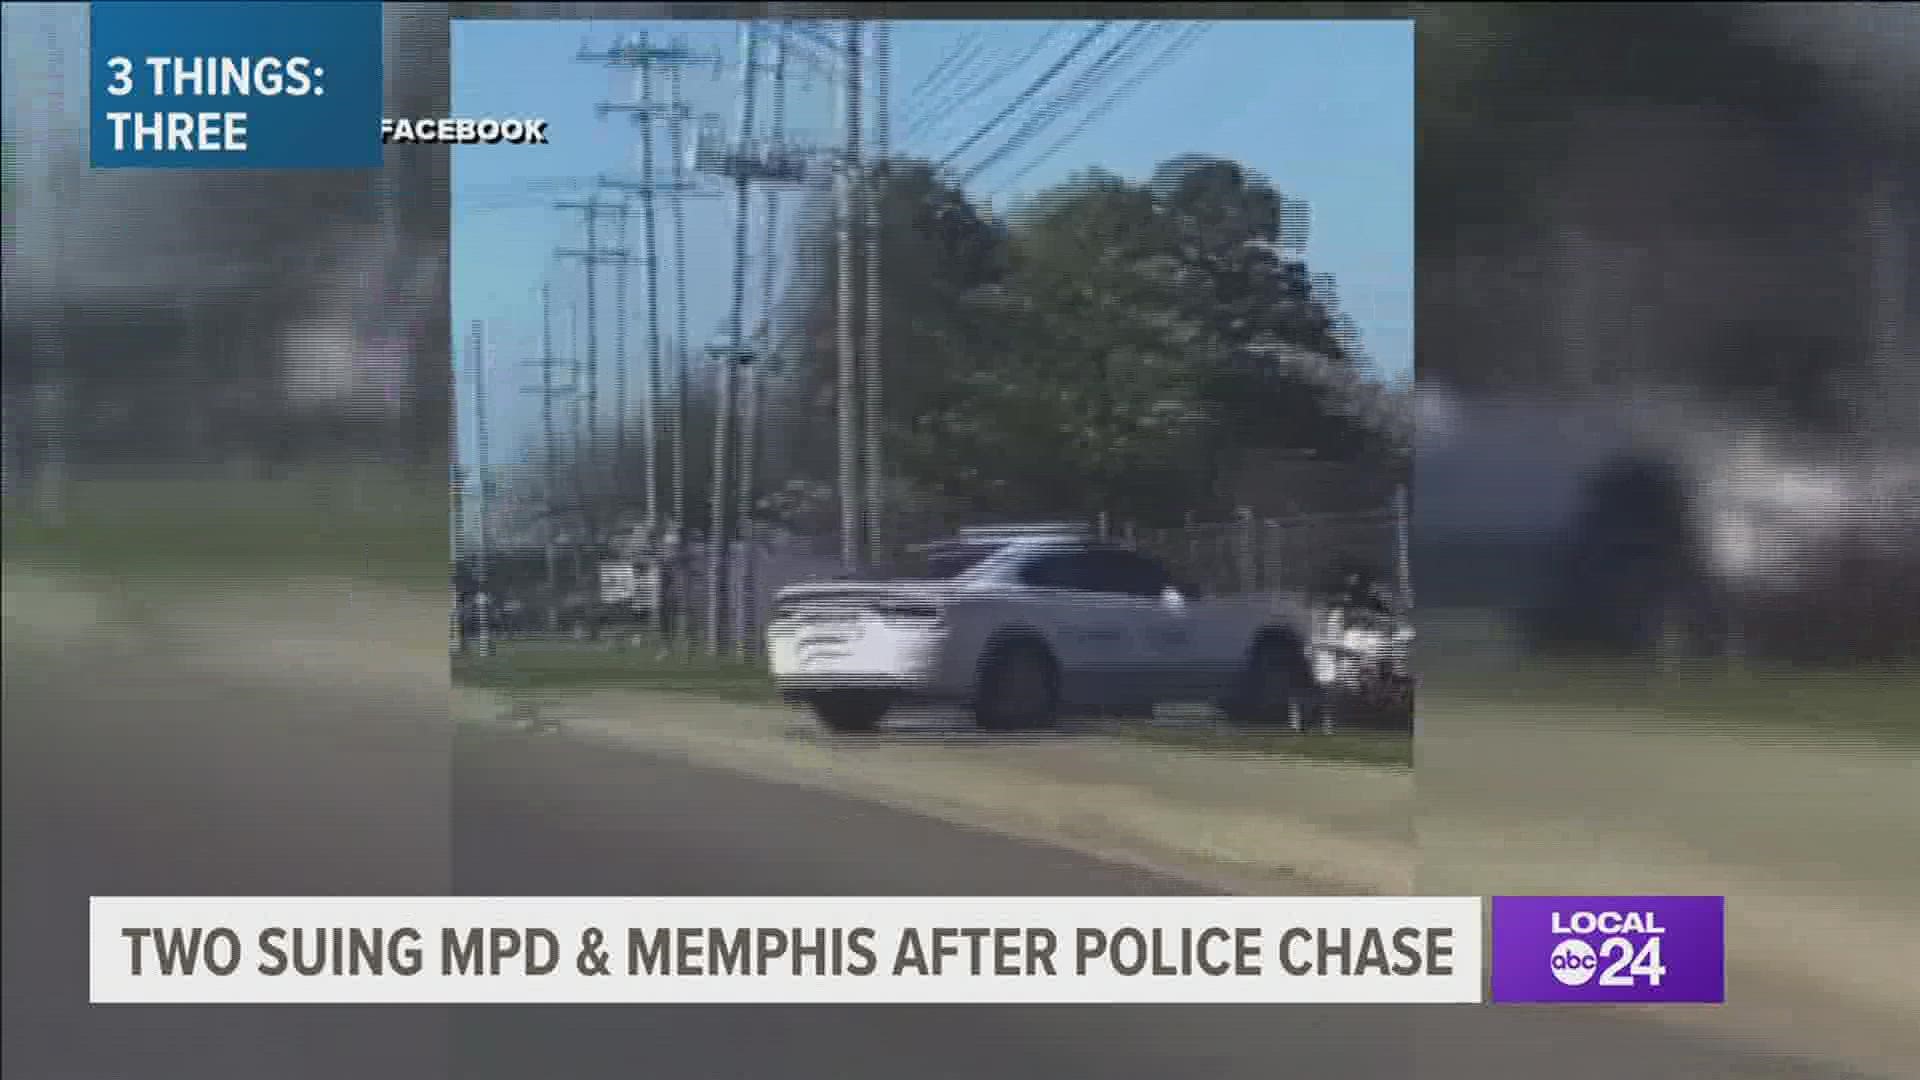 Lawsuit filed against Memphis Police officers & city in ATV chase